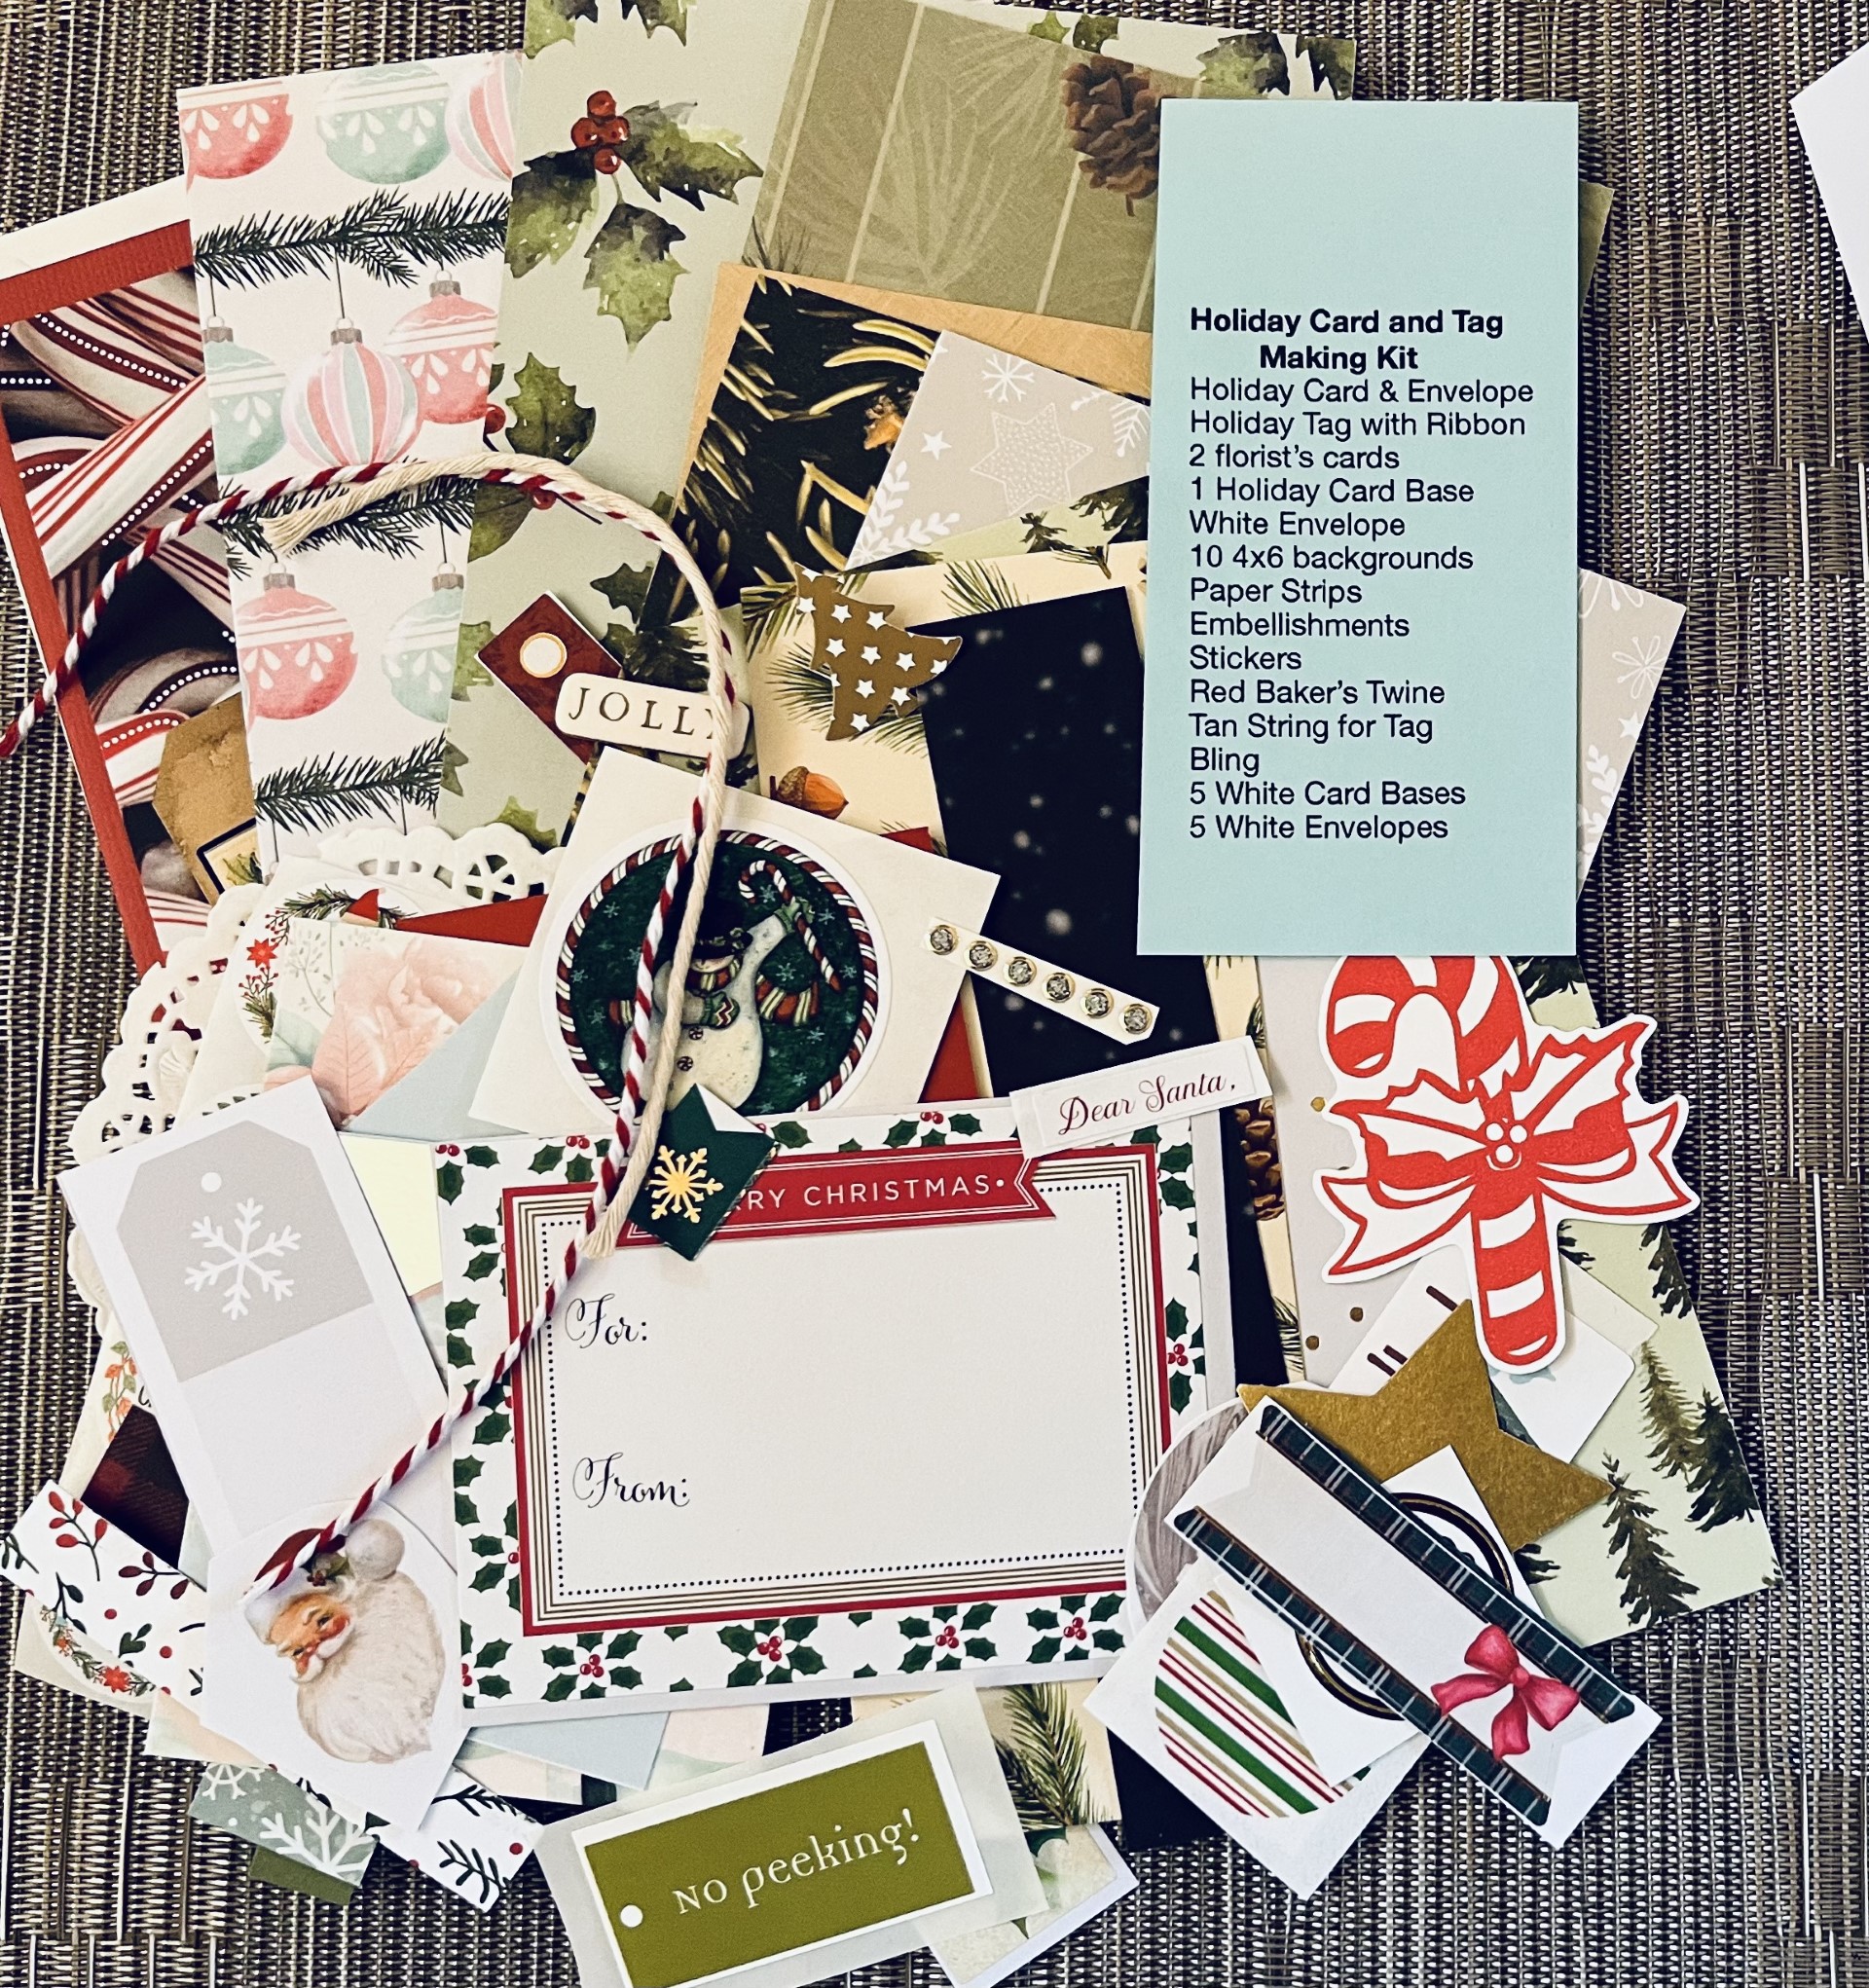 Assorted materials for making holiday cards and gift tags